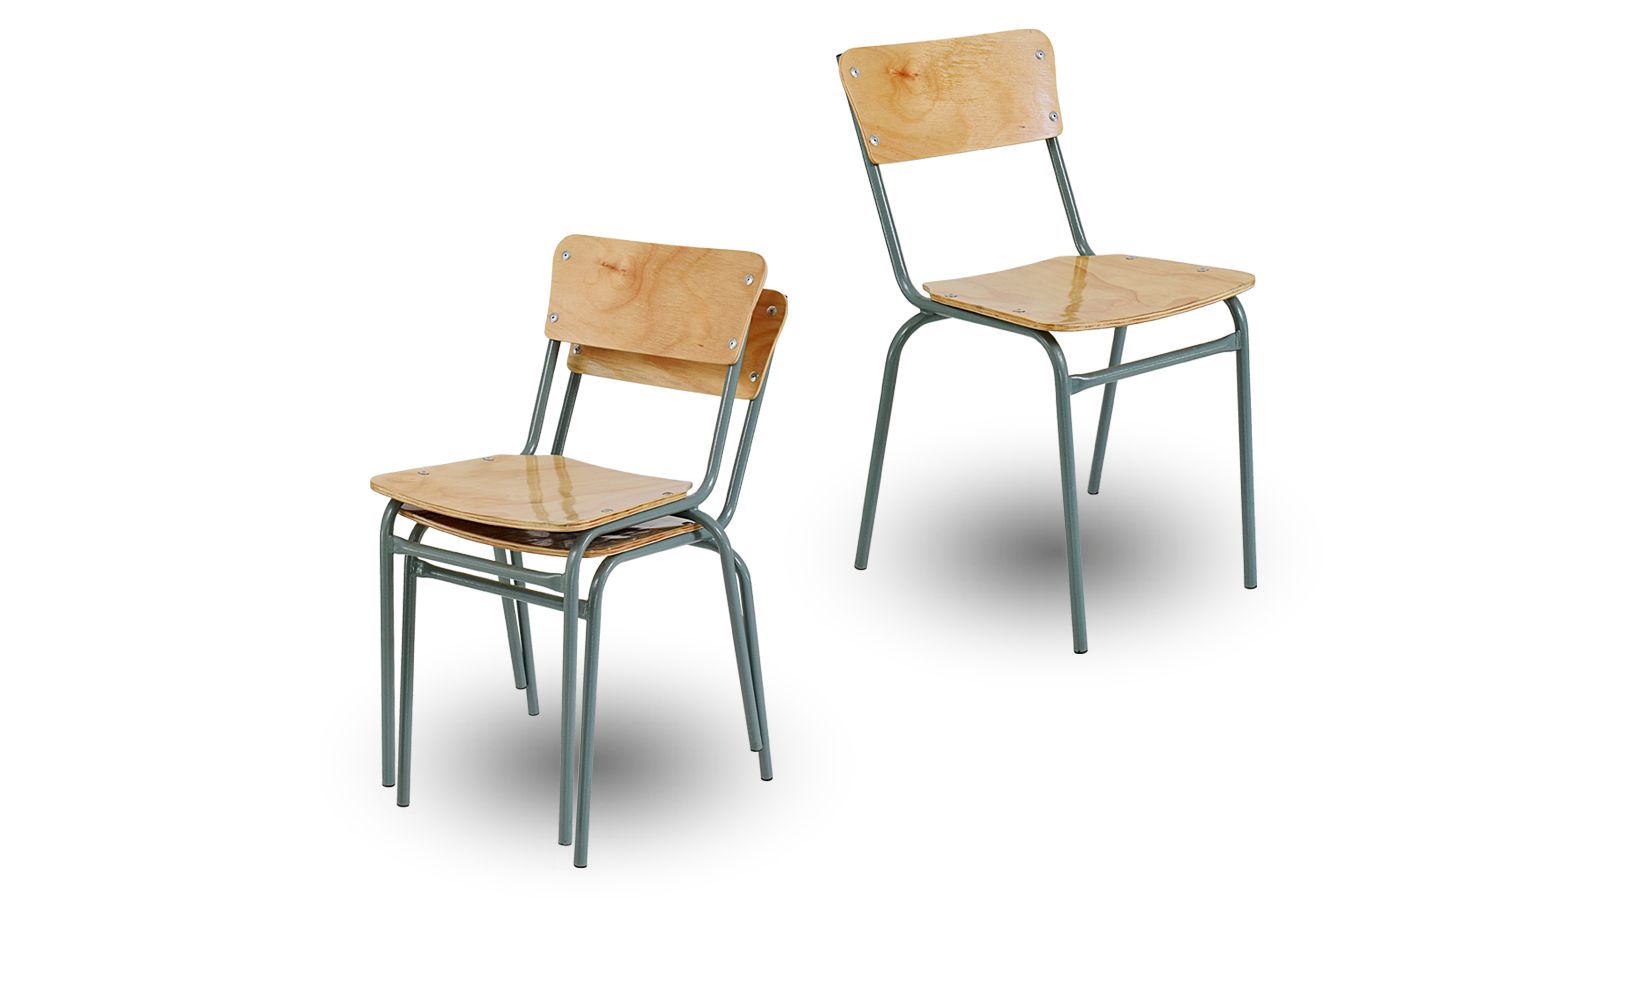 Traditional School Chair